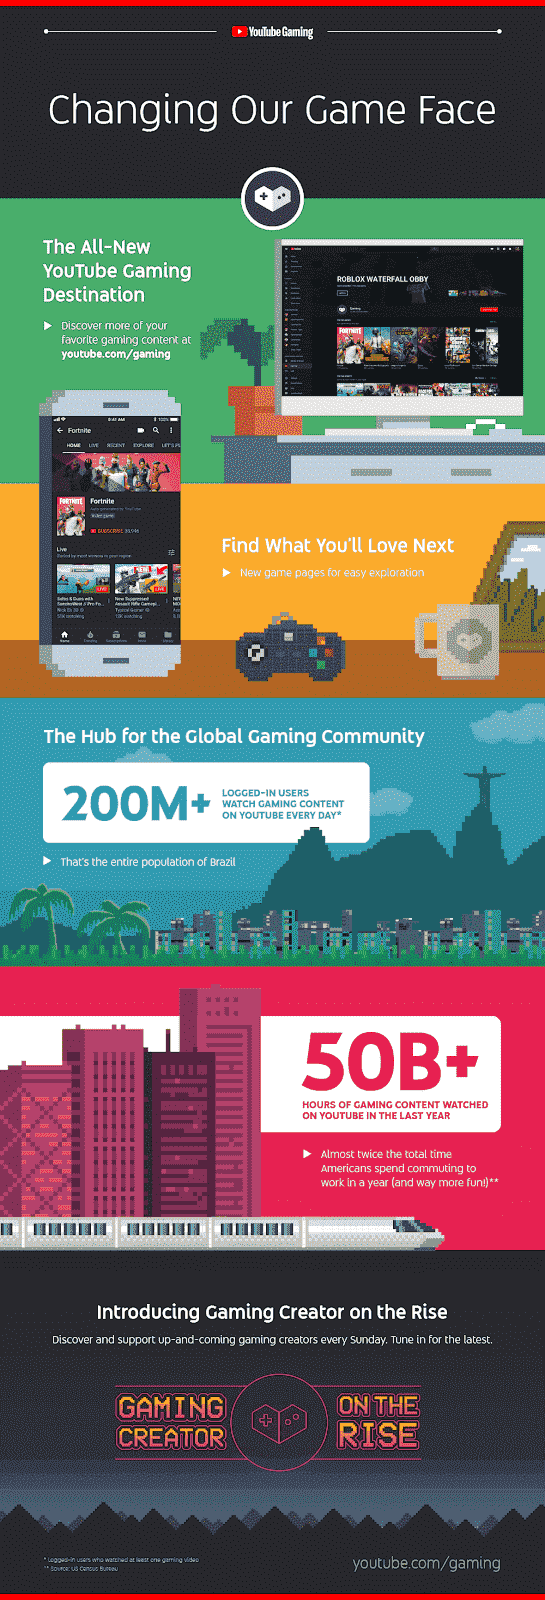 YouTube Gaming gets a new home YT_Gaming_Infographic_17Sept_EN-US.png